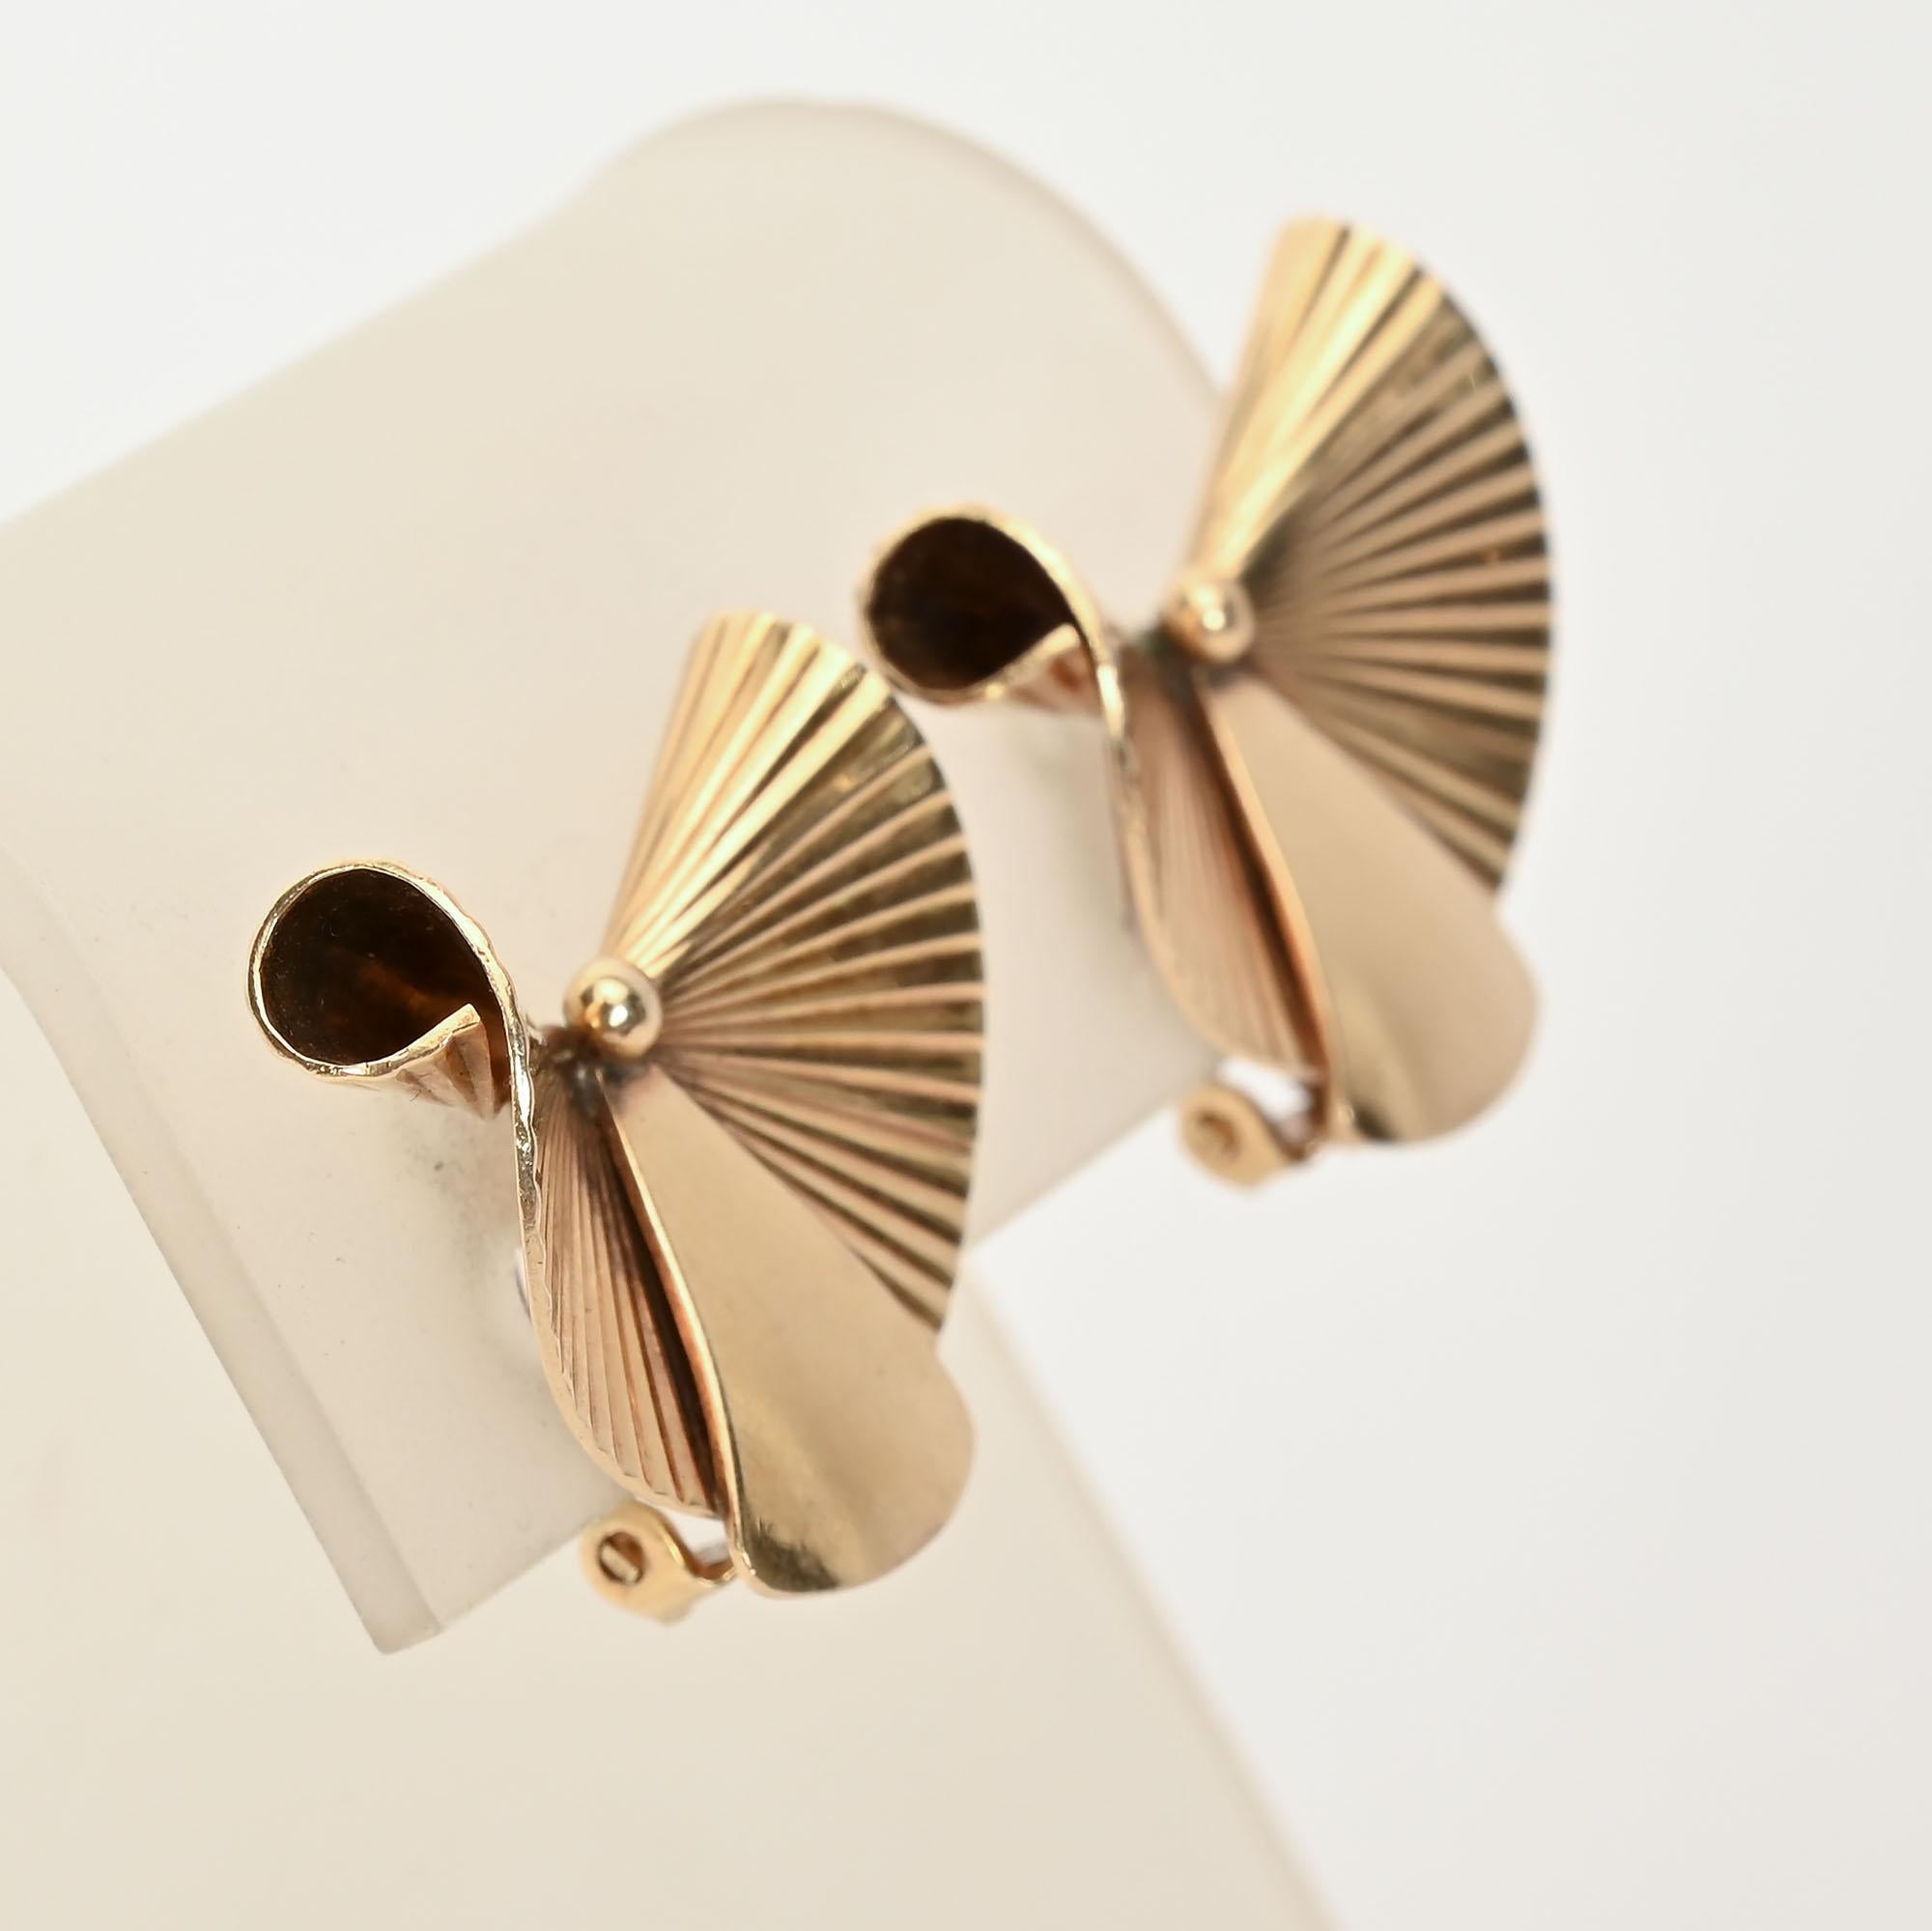 Fourteen karat gold earrings that are quintessentially Retro in design. Measure 1